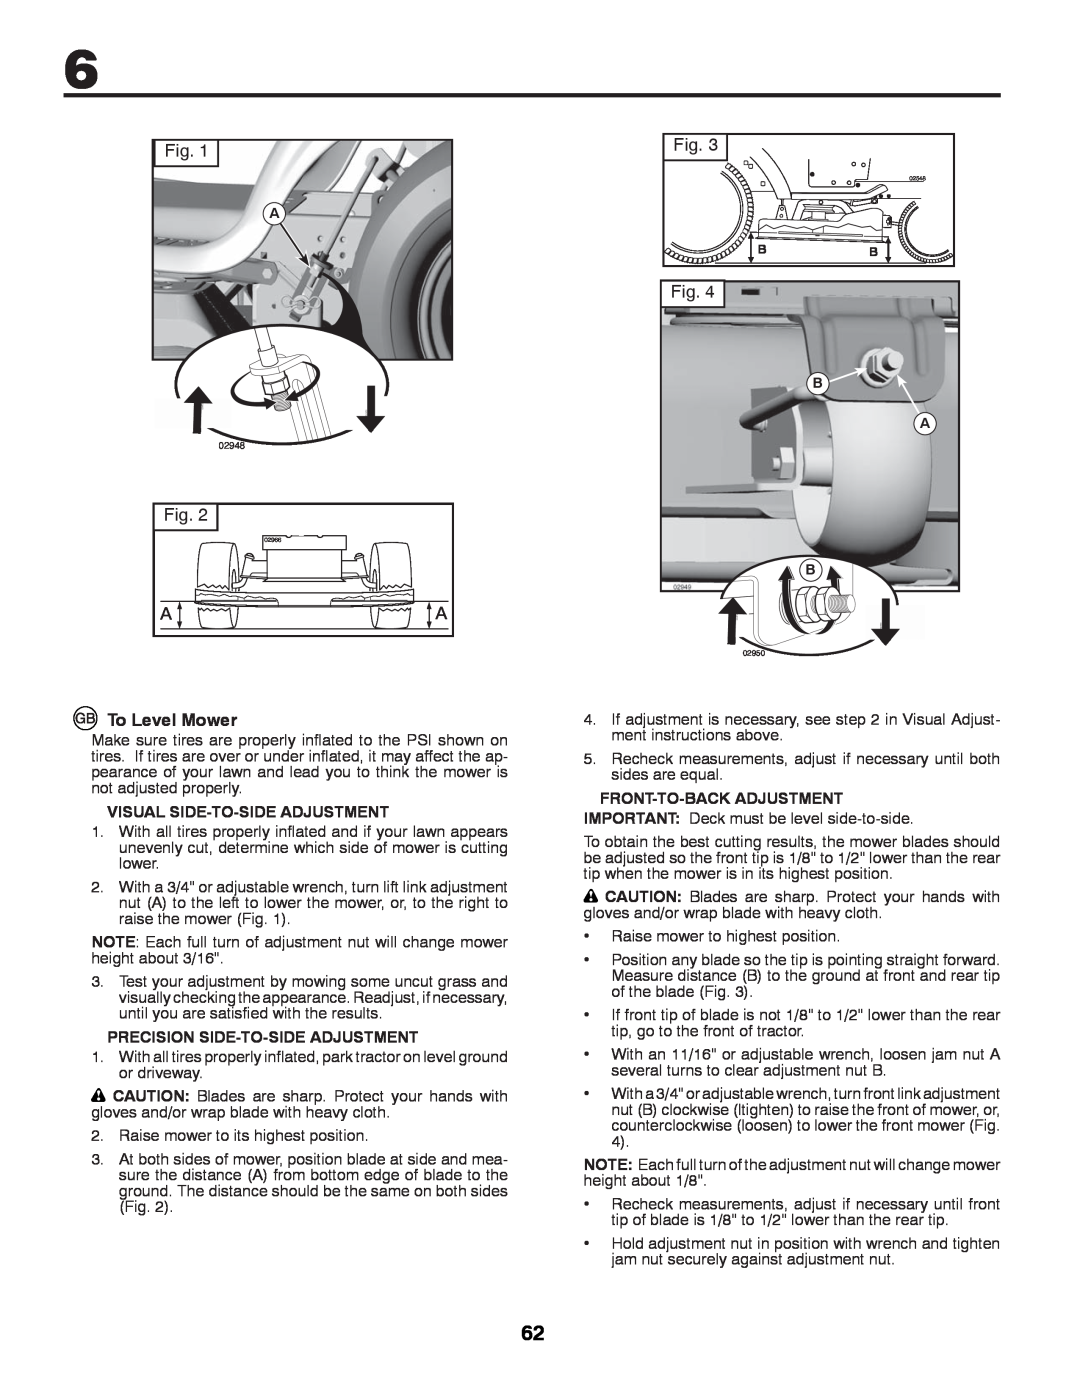 Partner Tech P145107H instruction manual To Level Mower, Visual Side-To-Side Adjustment, Precision Side-To-Side Adjustment 